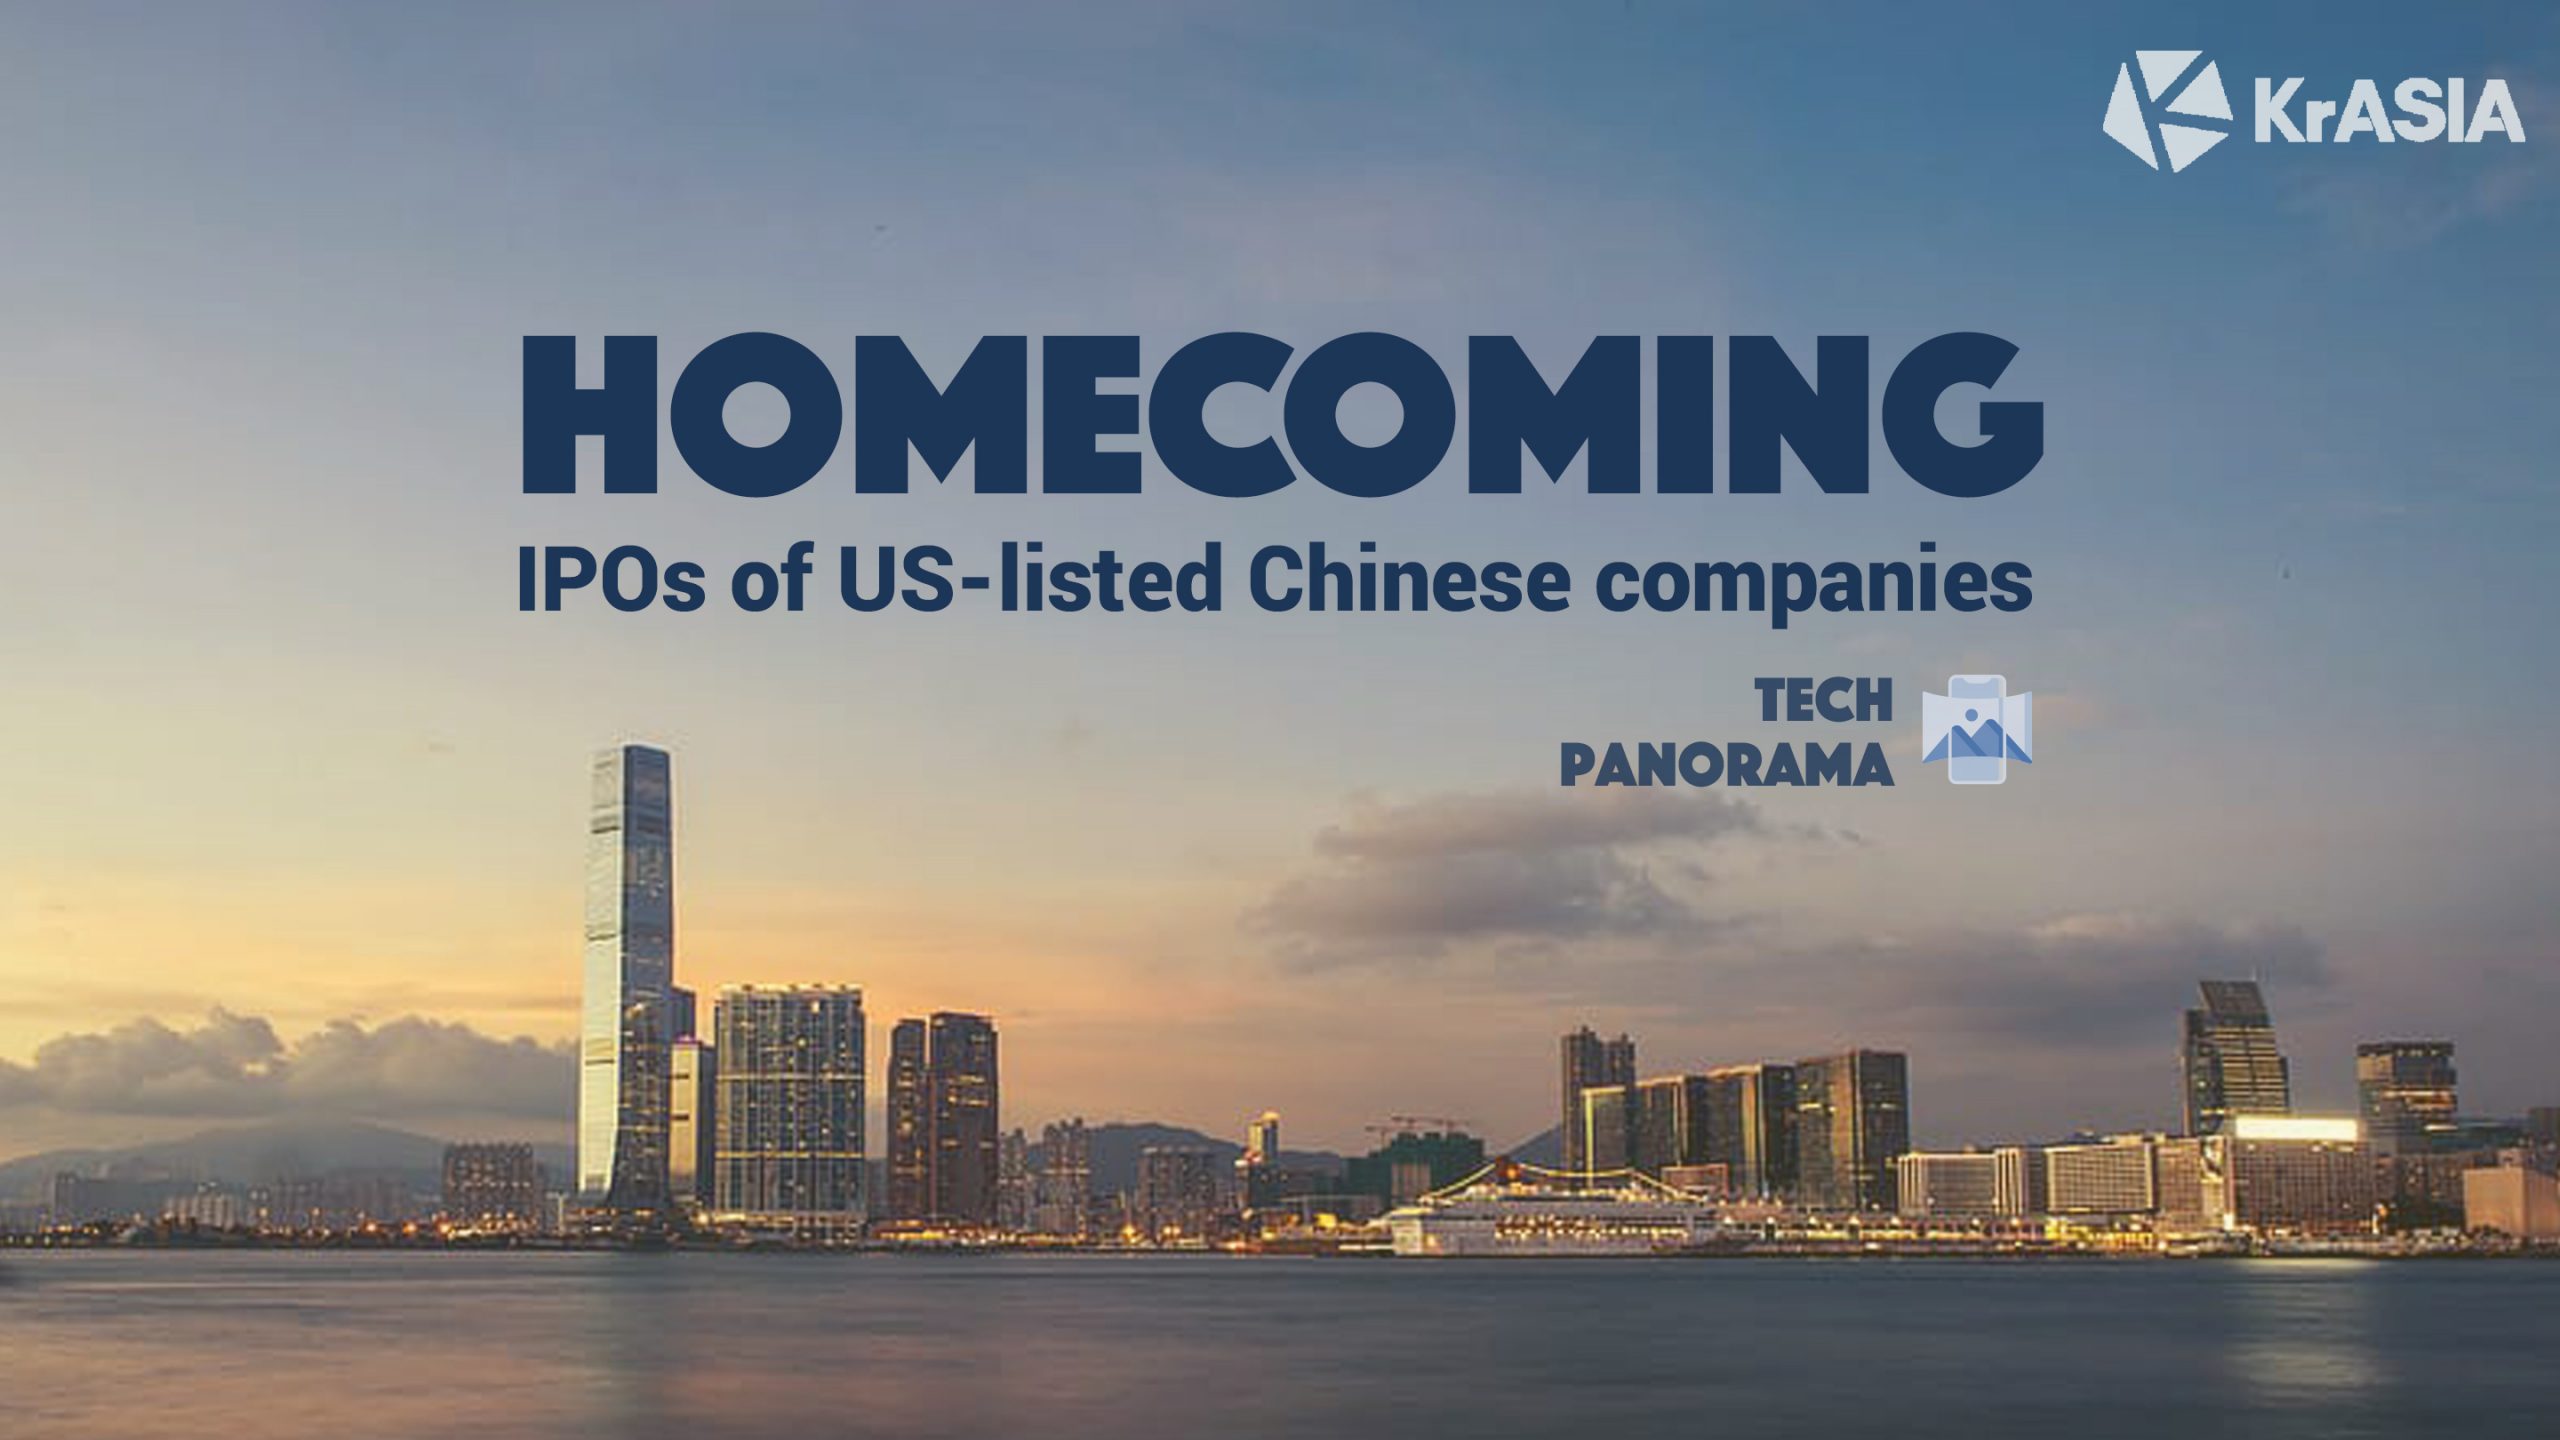 TECH PANORAMA | Which will be the next Chinese company to file for ‘homecoming’ listing? [Update]